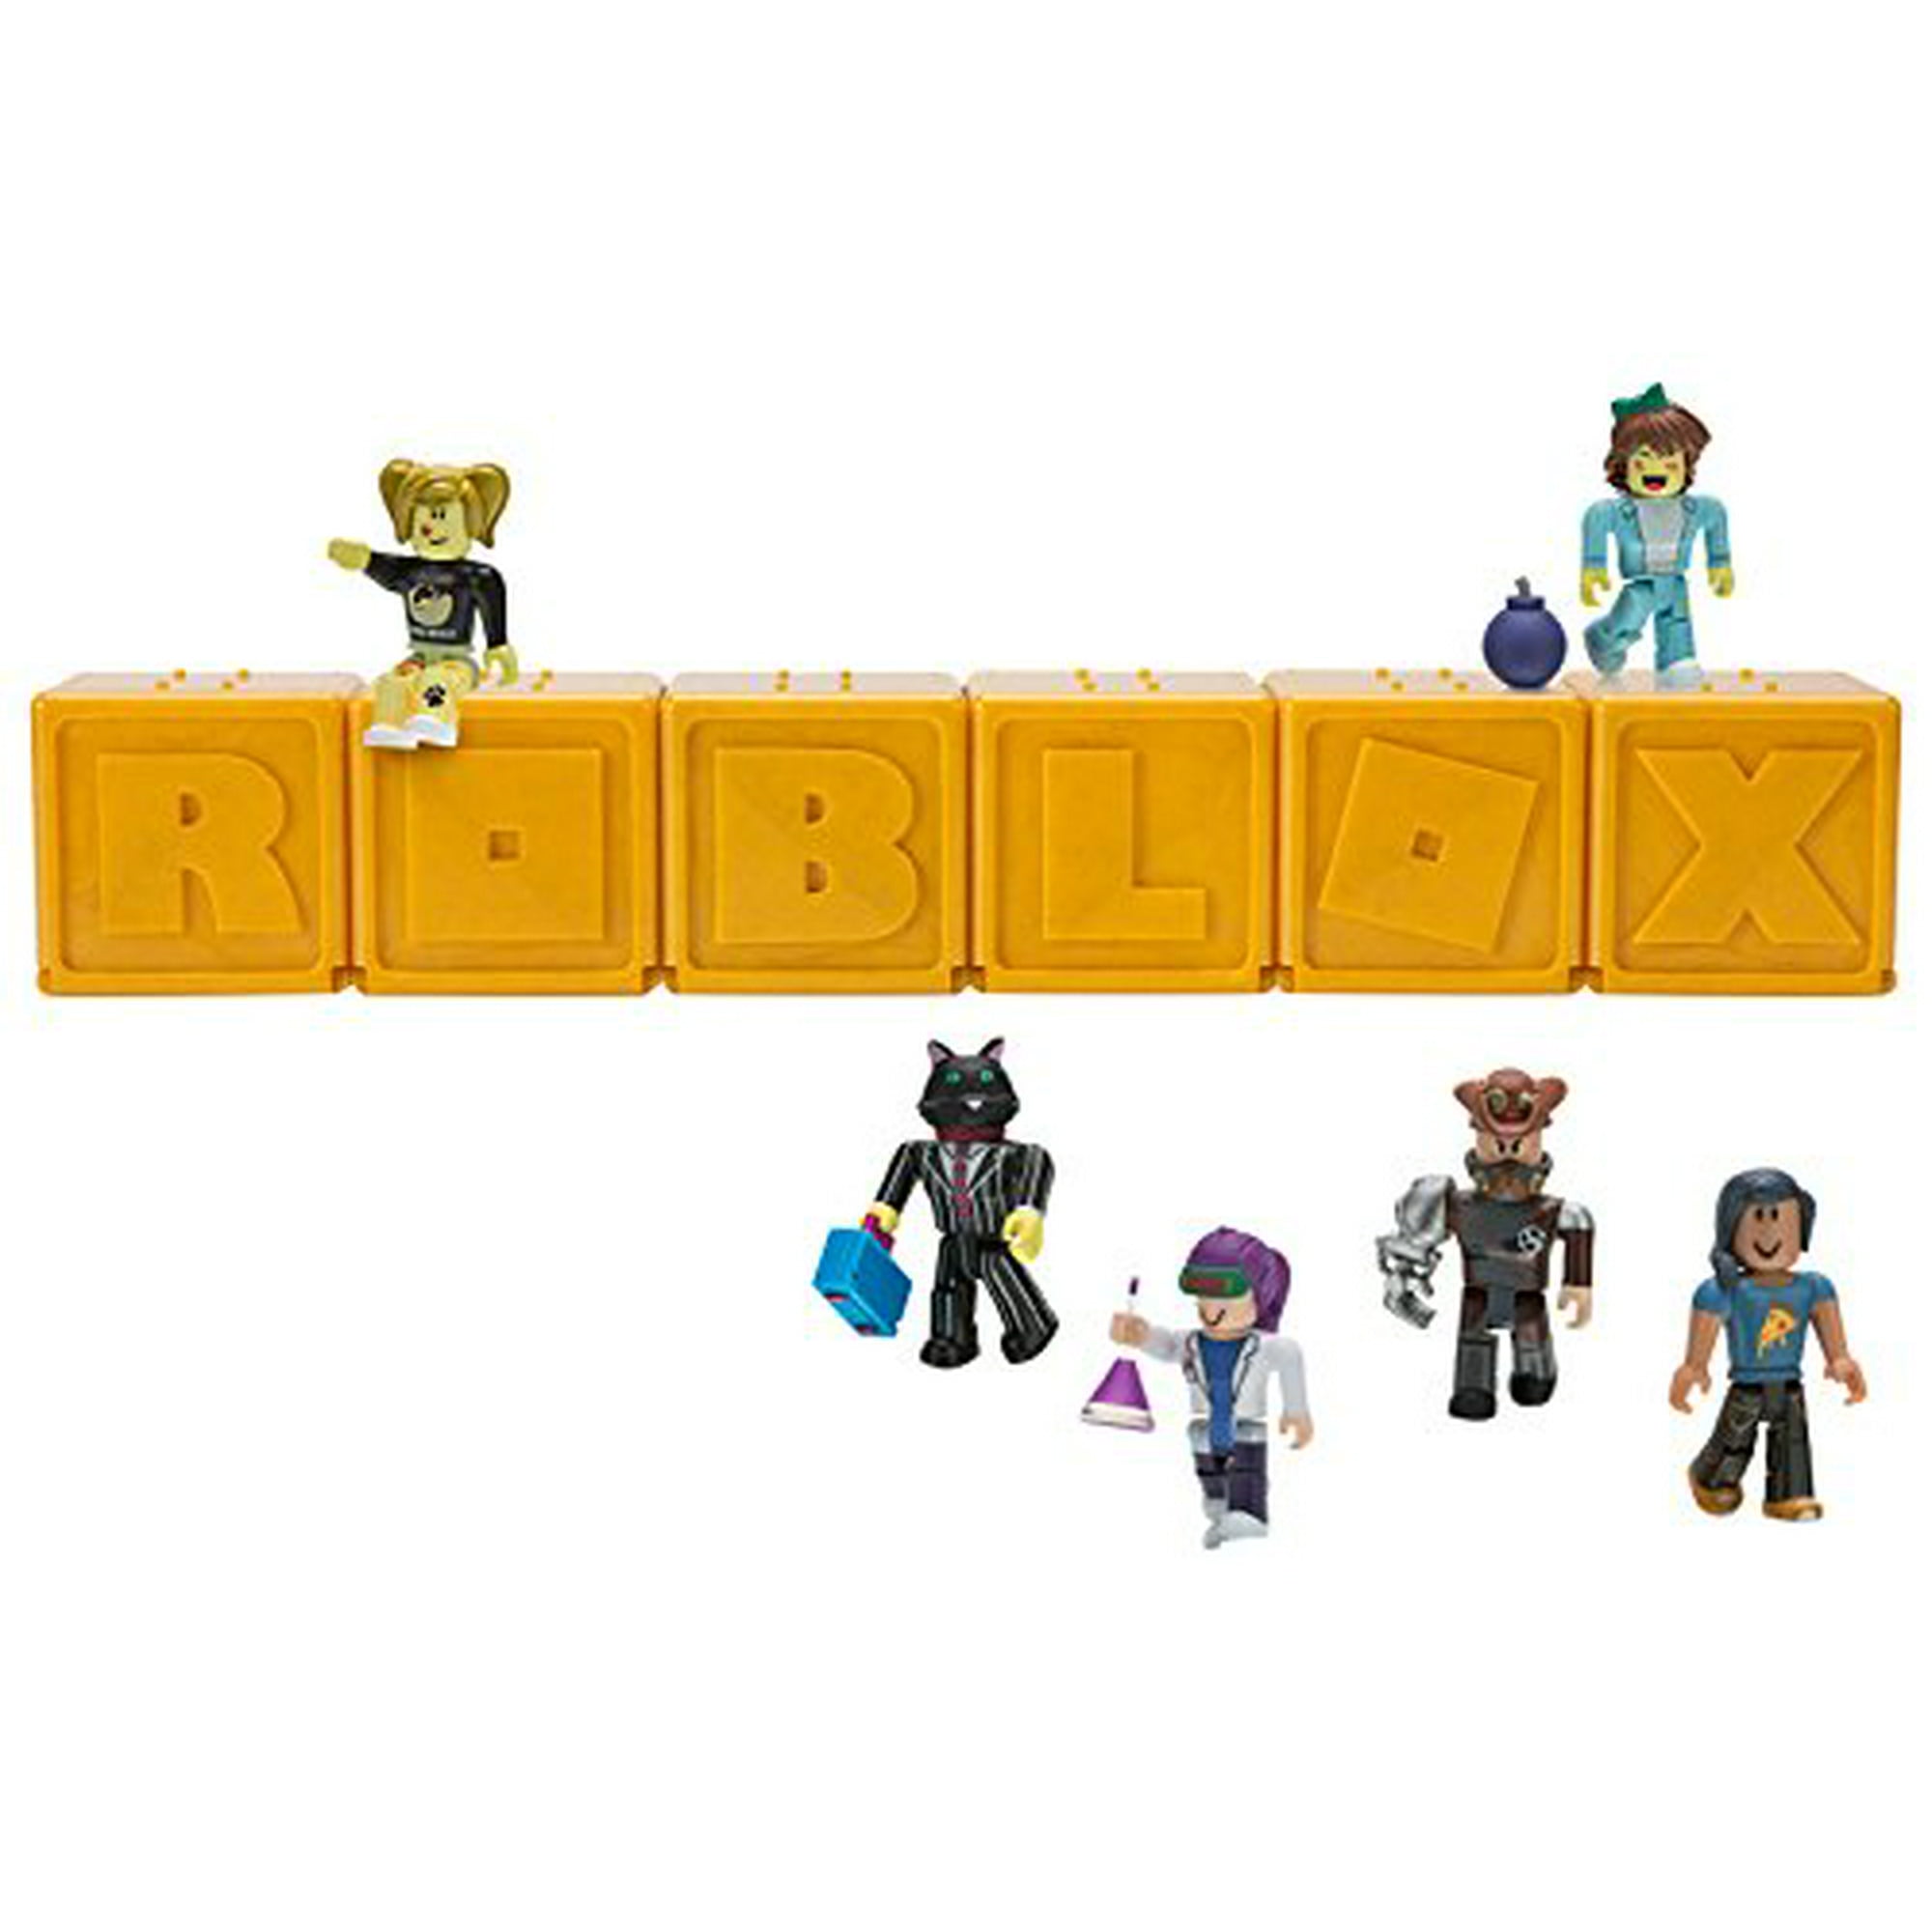 Roblox Celebrity Mystery Figure Series 1 Polybag Of 6 Action Figures Walmart Canada - buy roblox celebrity blind figure series 1 toy play collectable